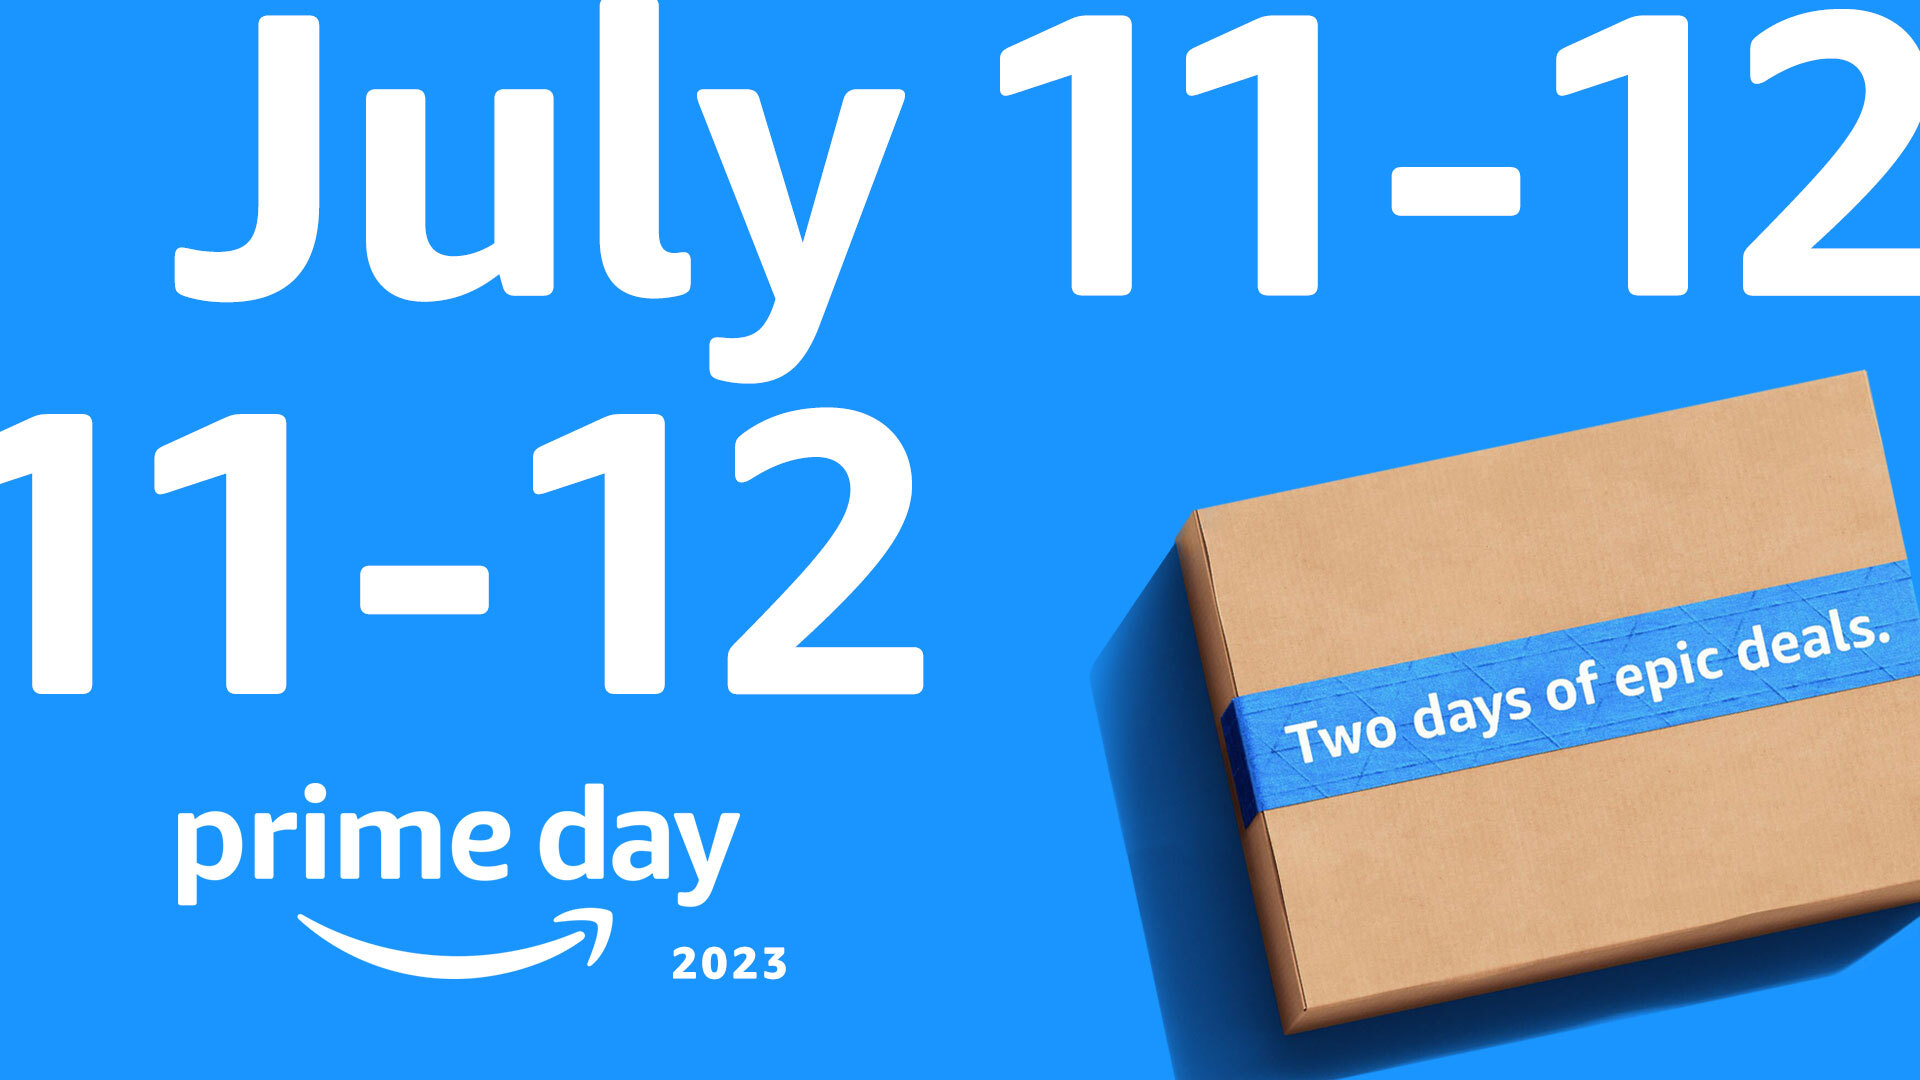 Amazon’s Fire TV Stick Was The Best Selling Device on Prime Day 2023 As Prime Members Saved Over $2.5 Billion